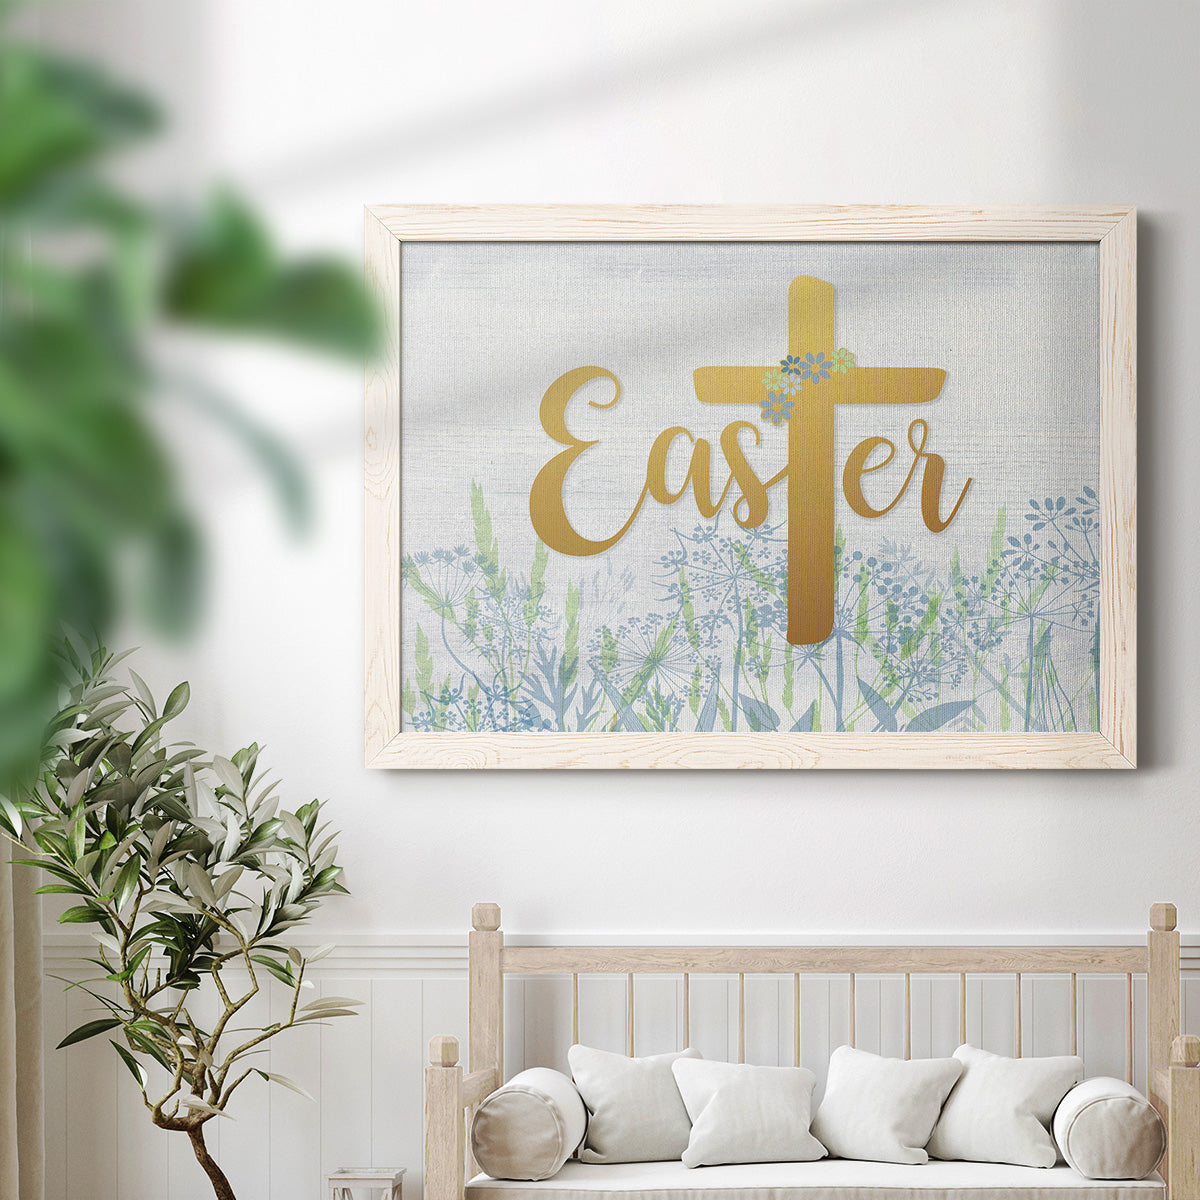 Easter Wildflowers-Premium Framed Canvas - Ready to Hang